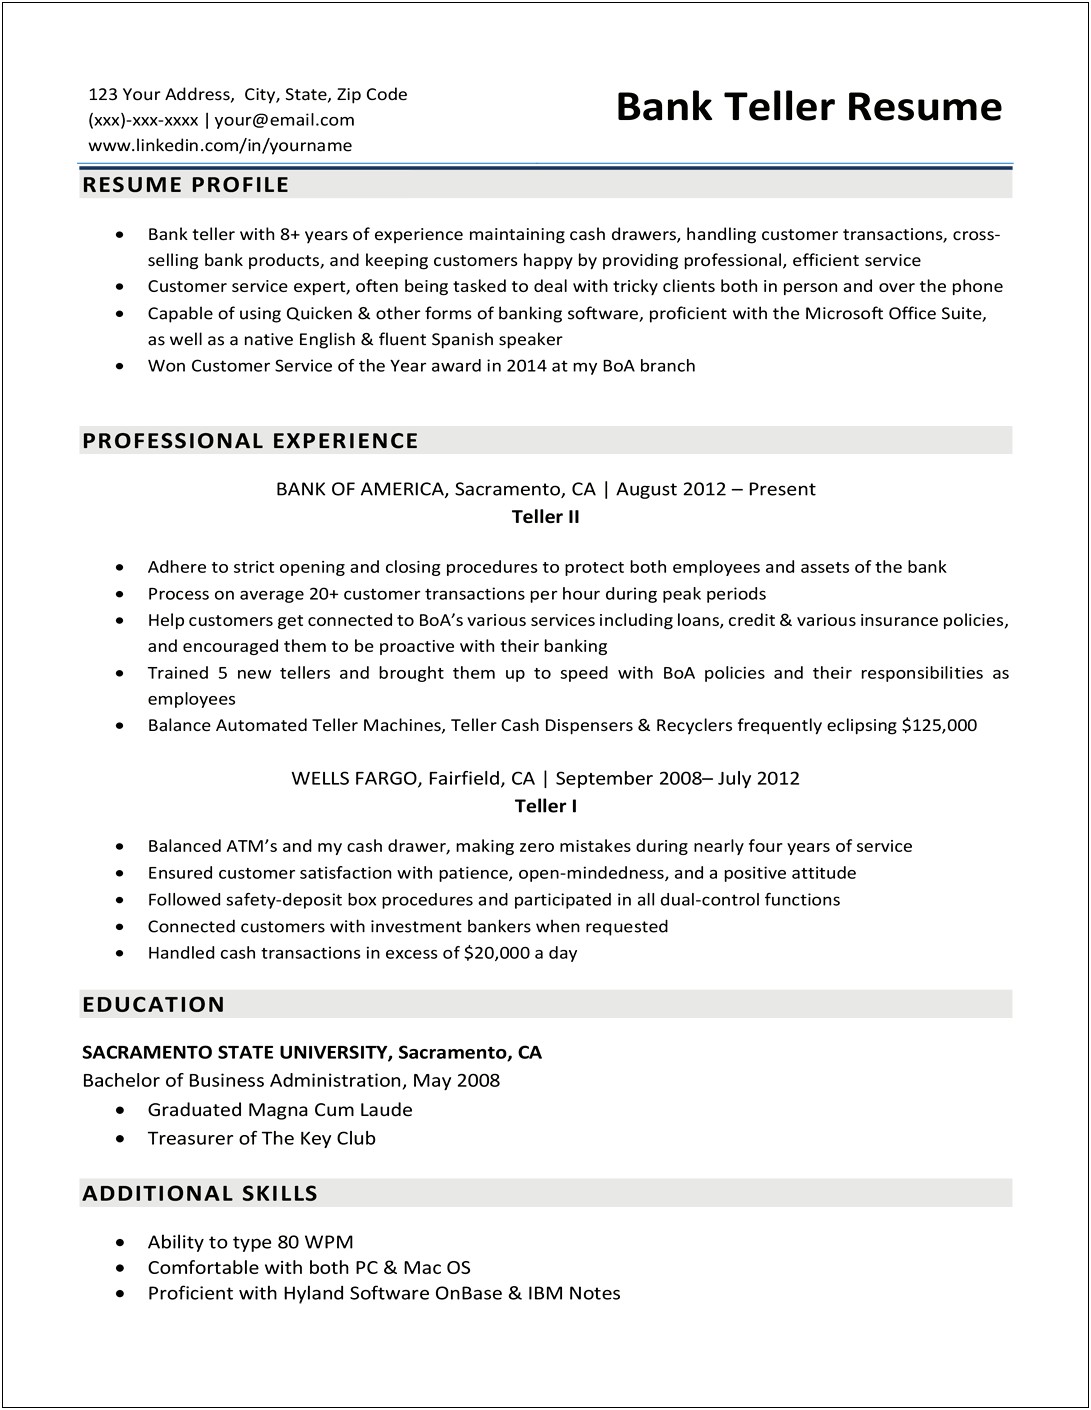 Resume Cover Letter For Bank Teller No Experience